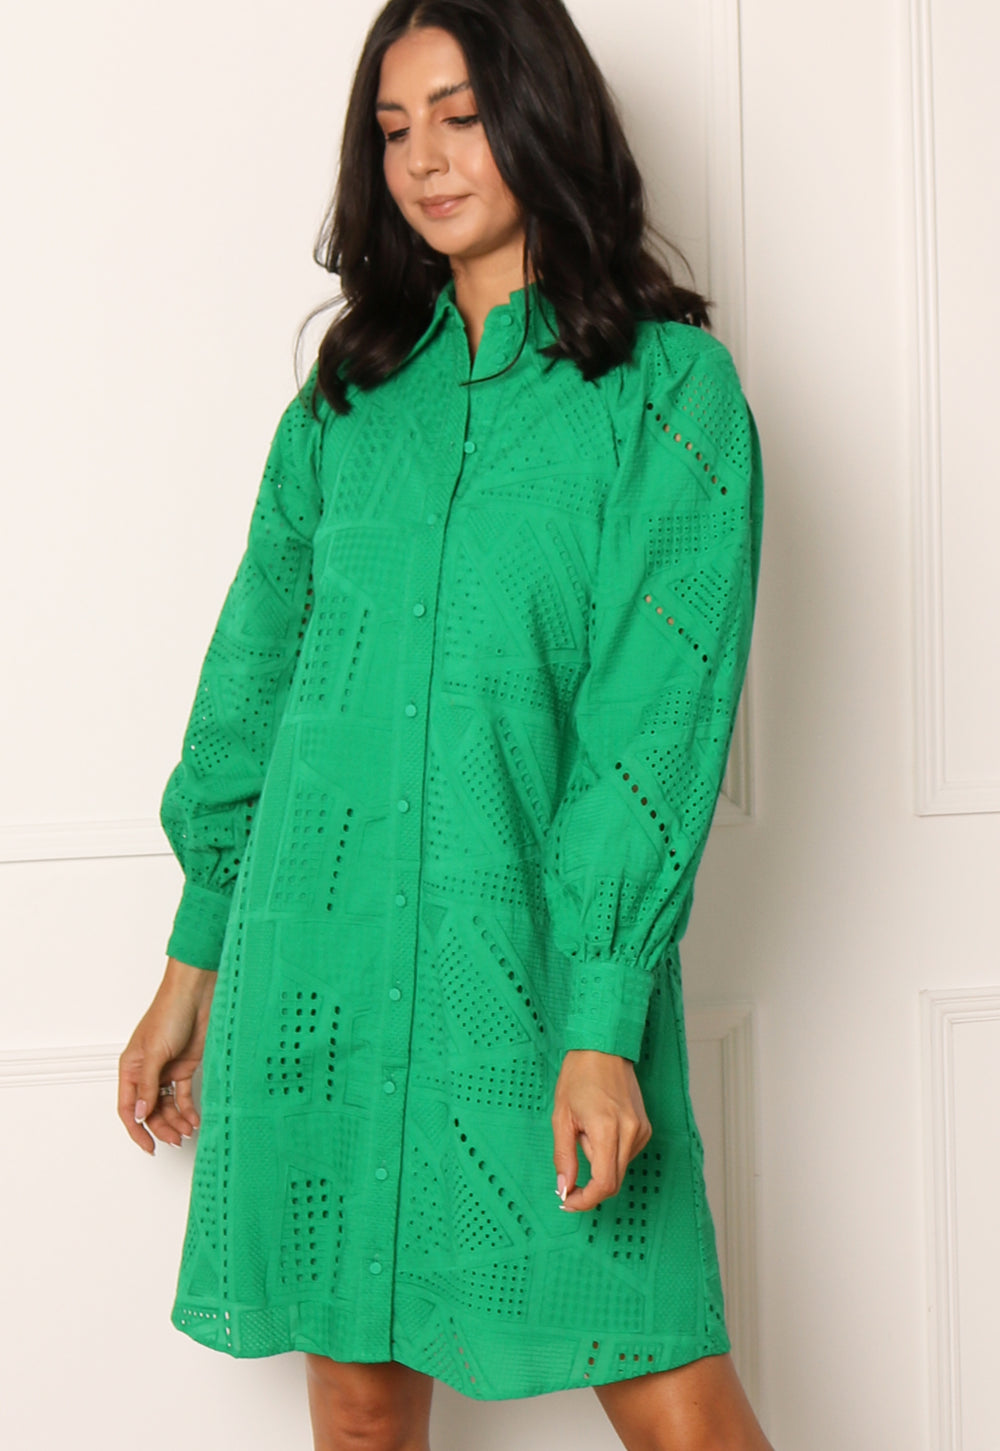 YAS Sado Long Sleeve Broderie Anglaise Shirt Dress in Bright Green | One  Nation Clothing YAS Sado Long Sleeve Broderie Anglaise Shirt Dress in  Bright Green